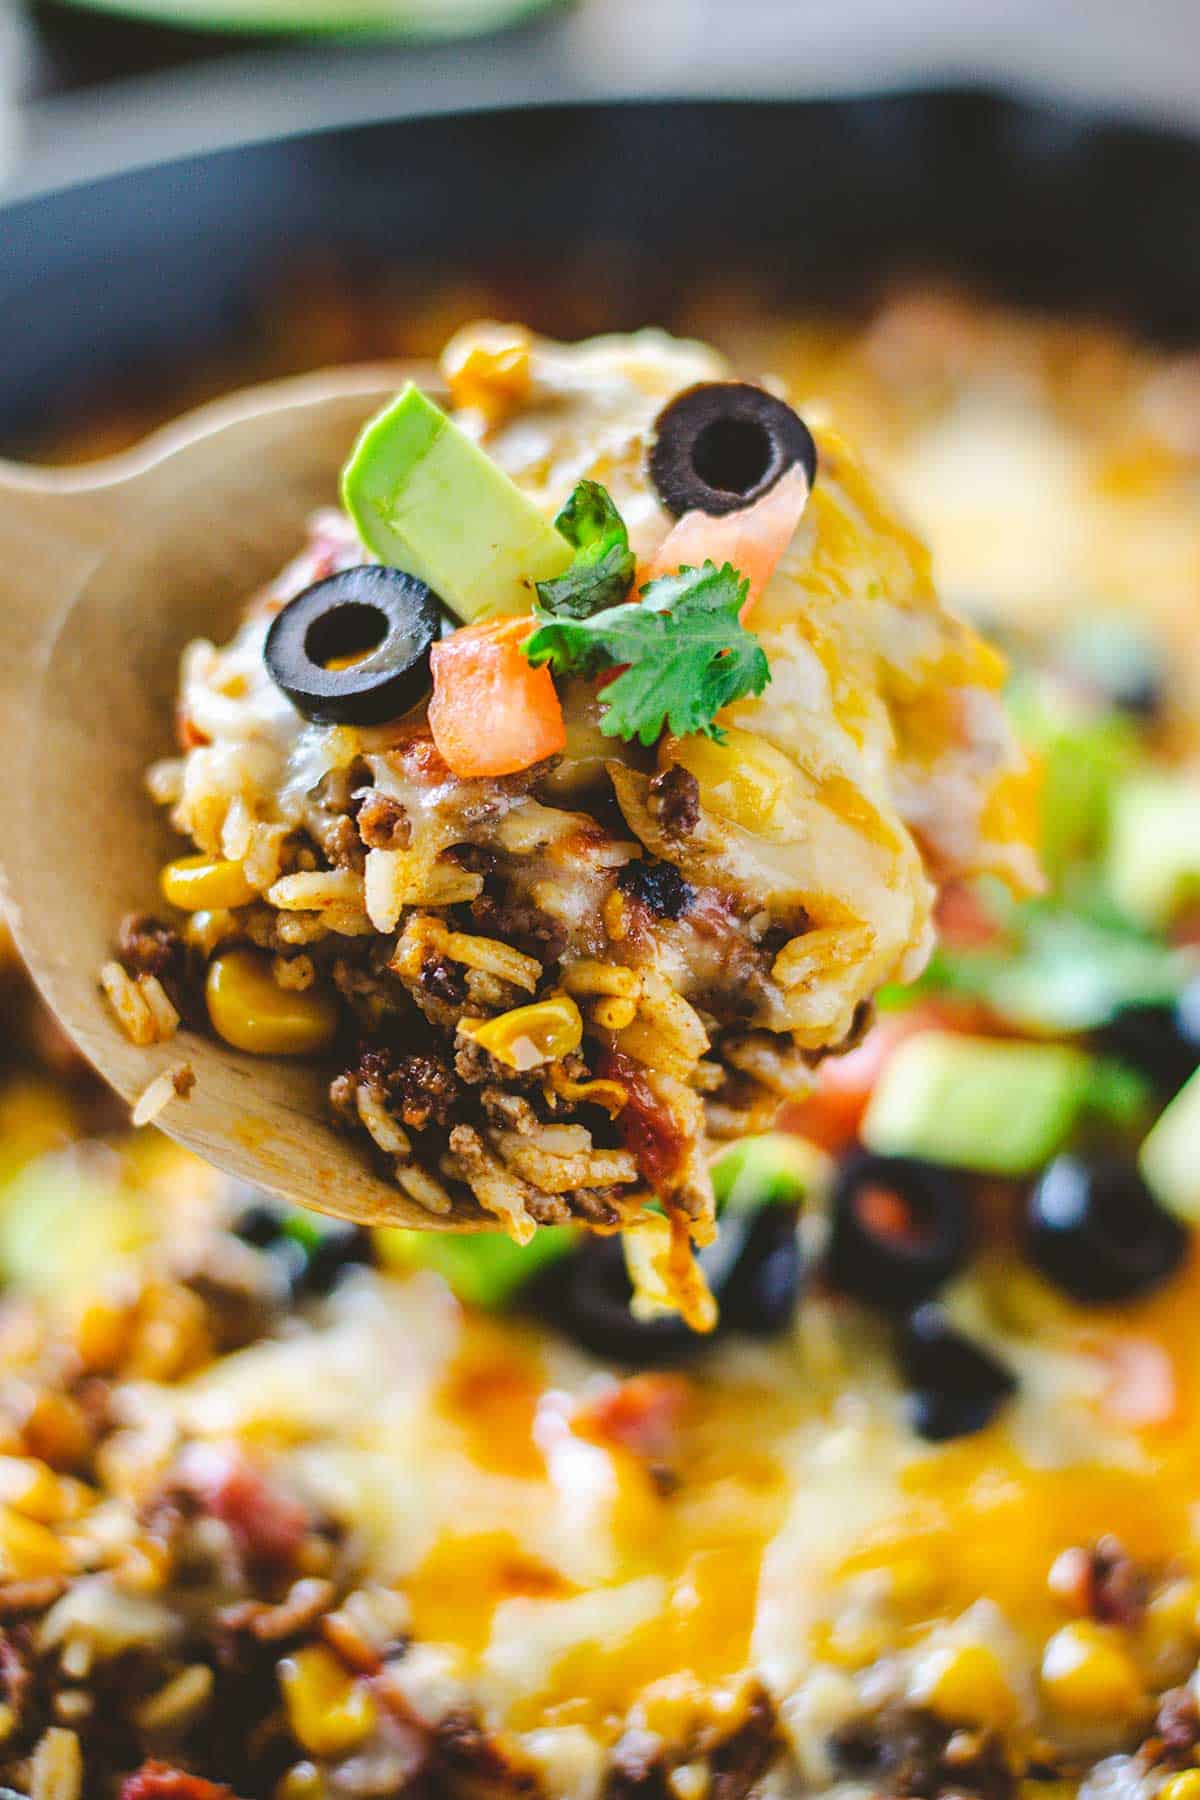 Up close image of a spoon full of mexican rice and beef casserole.